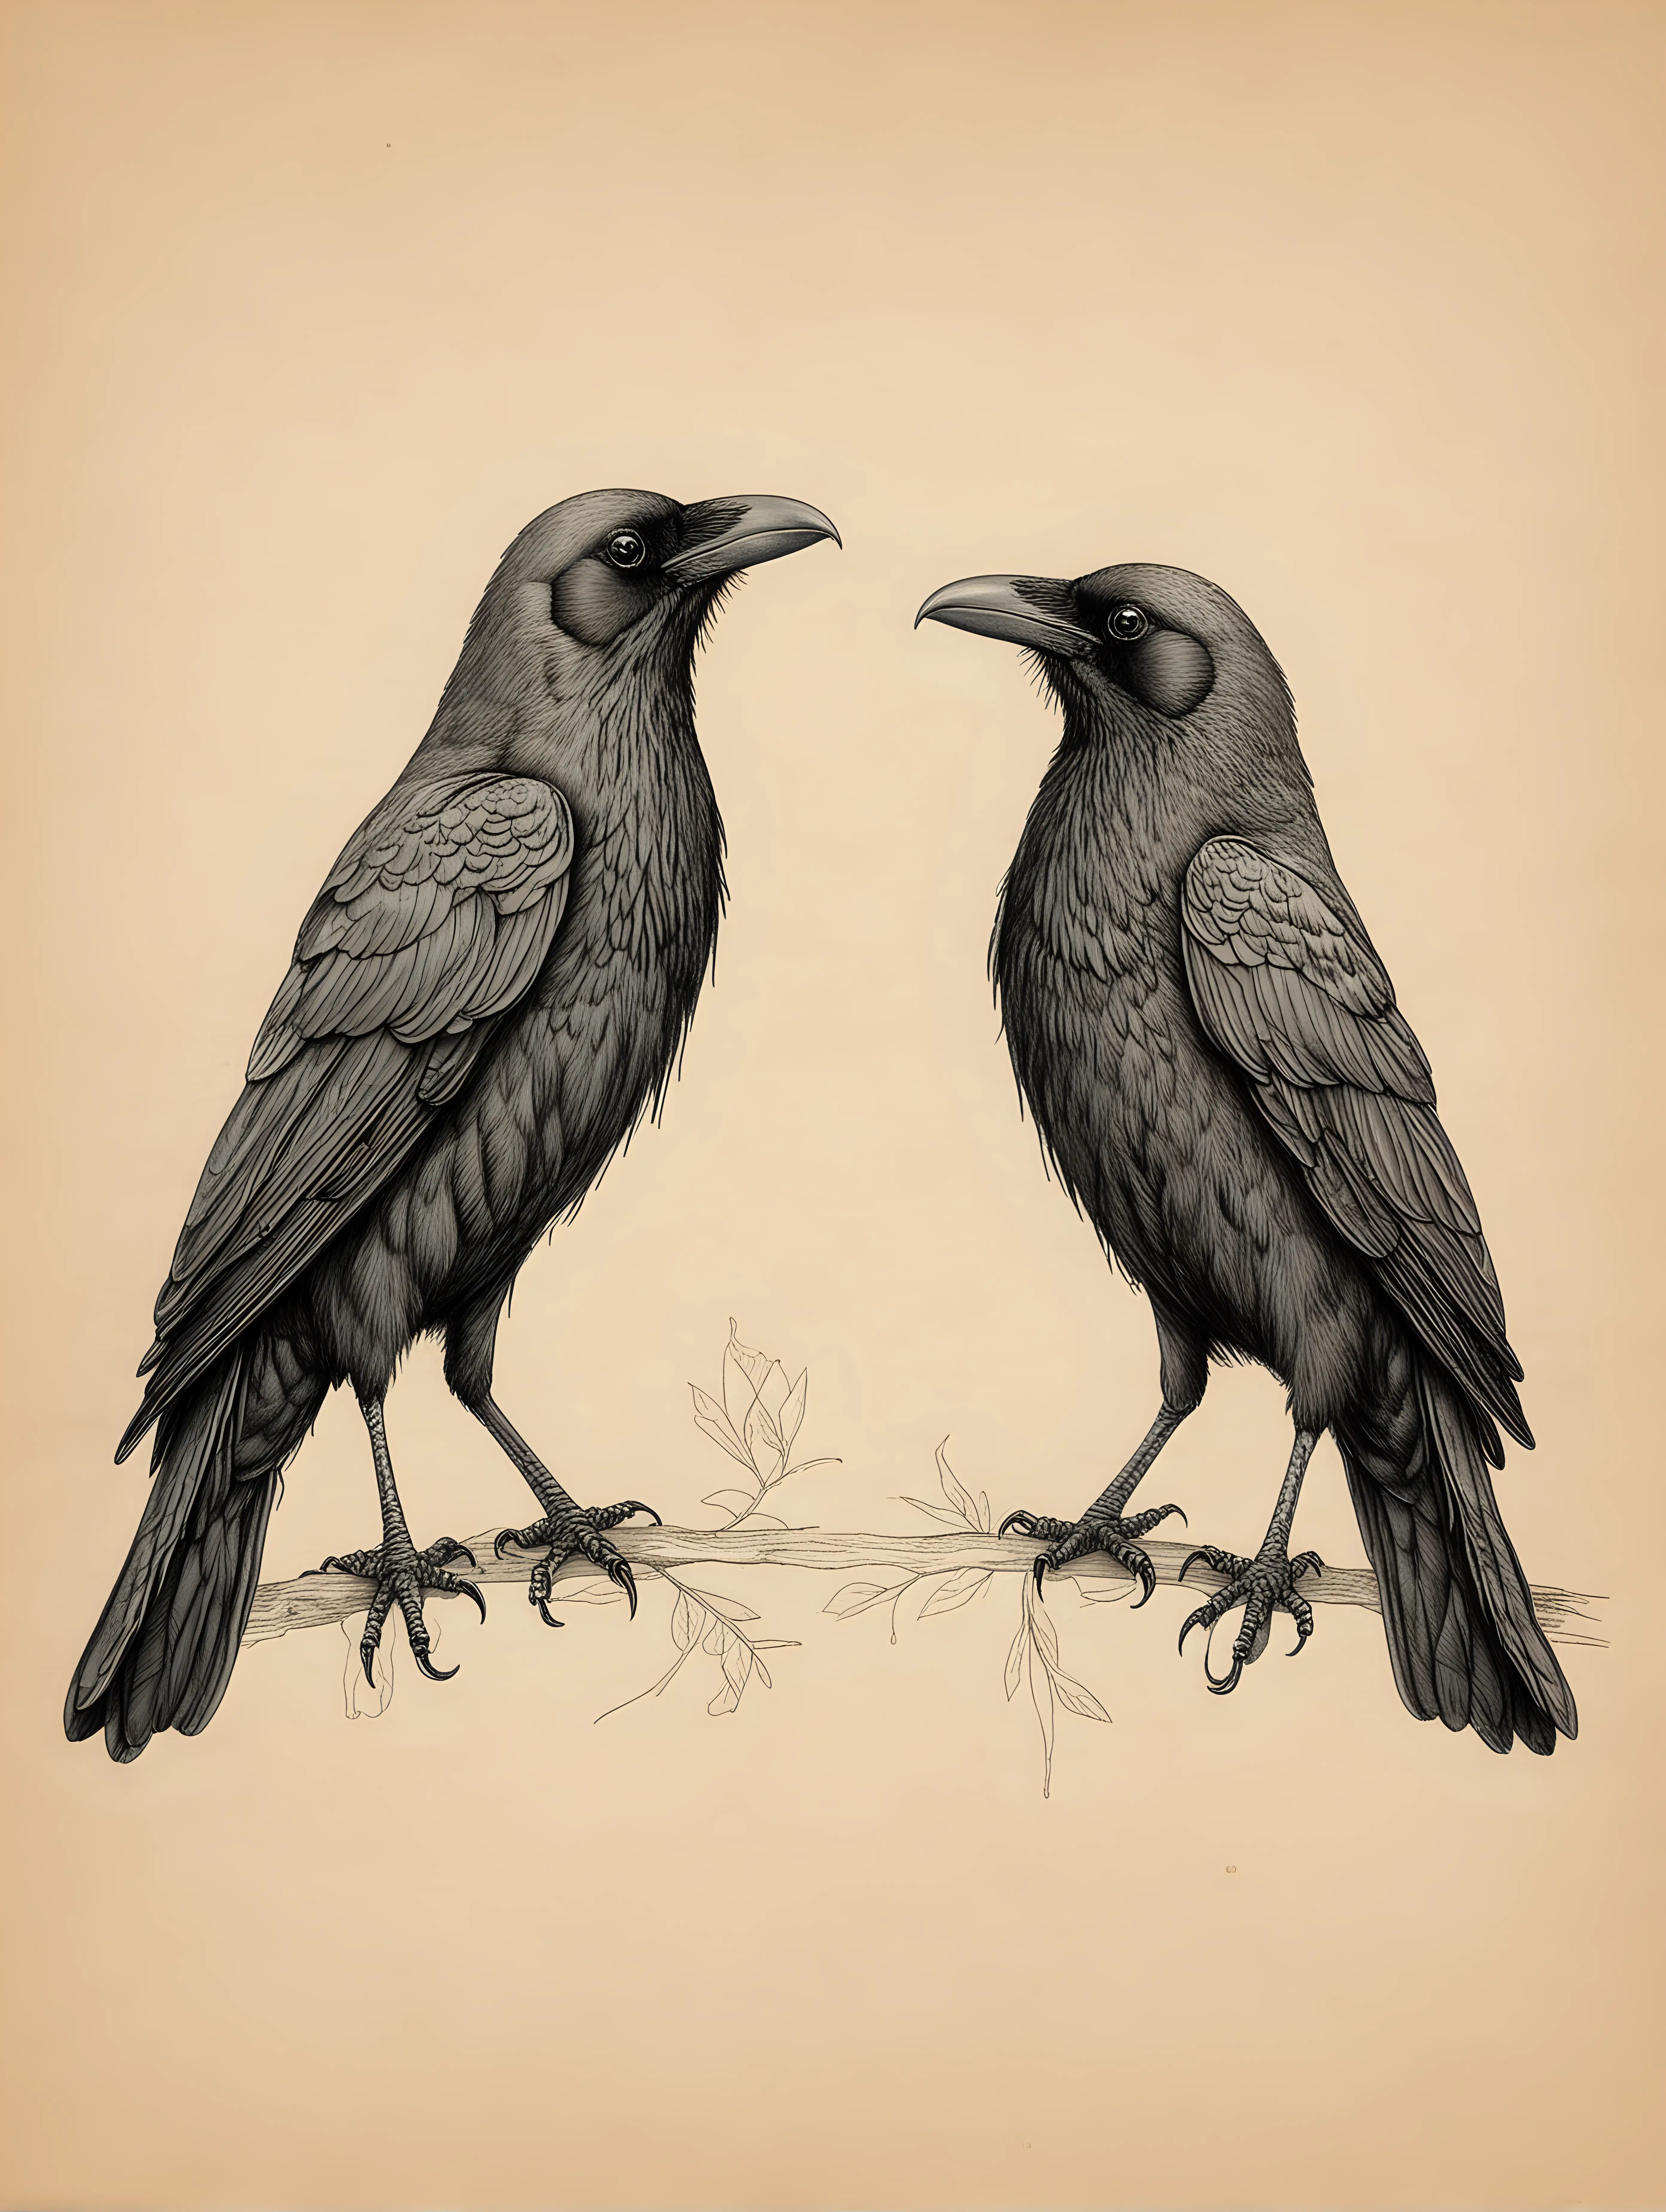 Friendly Black Crows Whimsical Line Drawing of Sociable Avian Companions